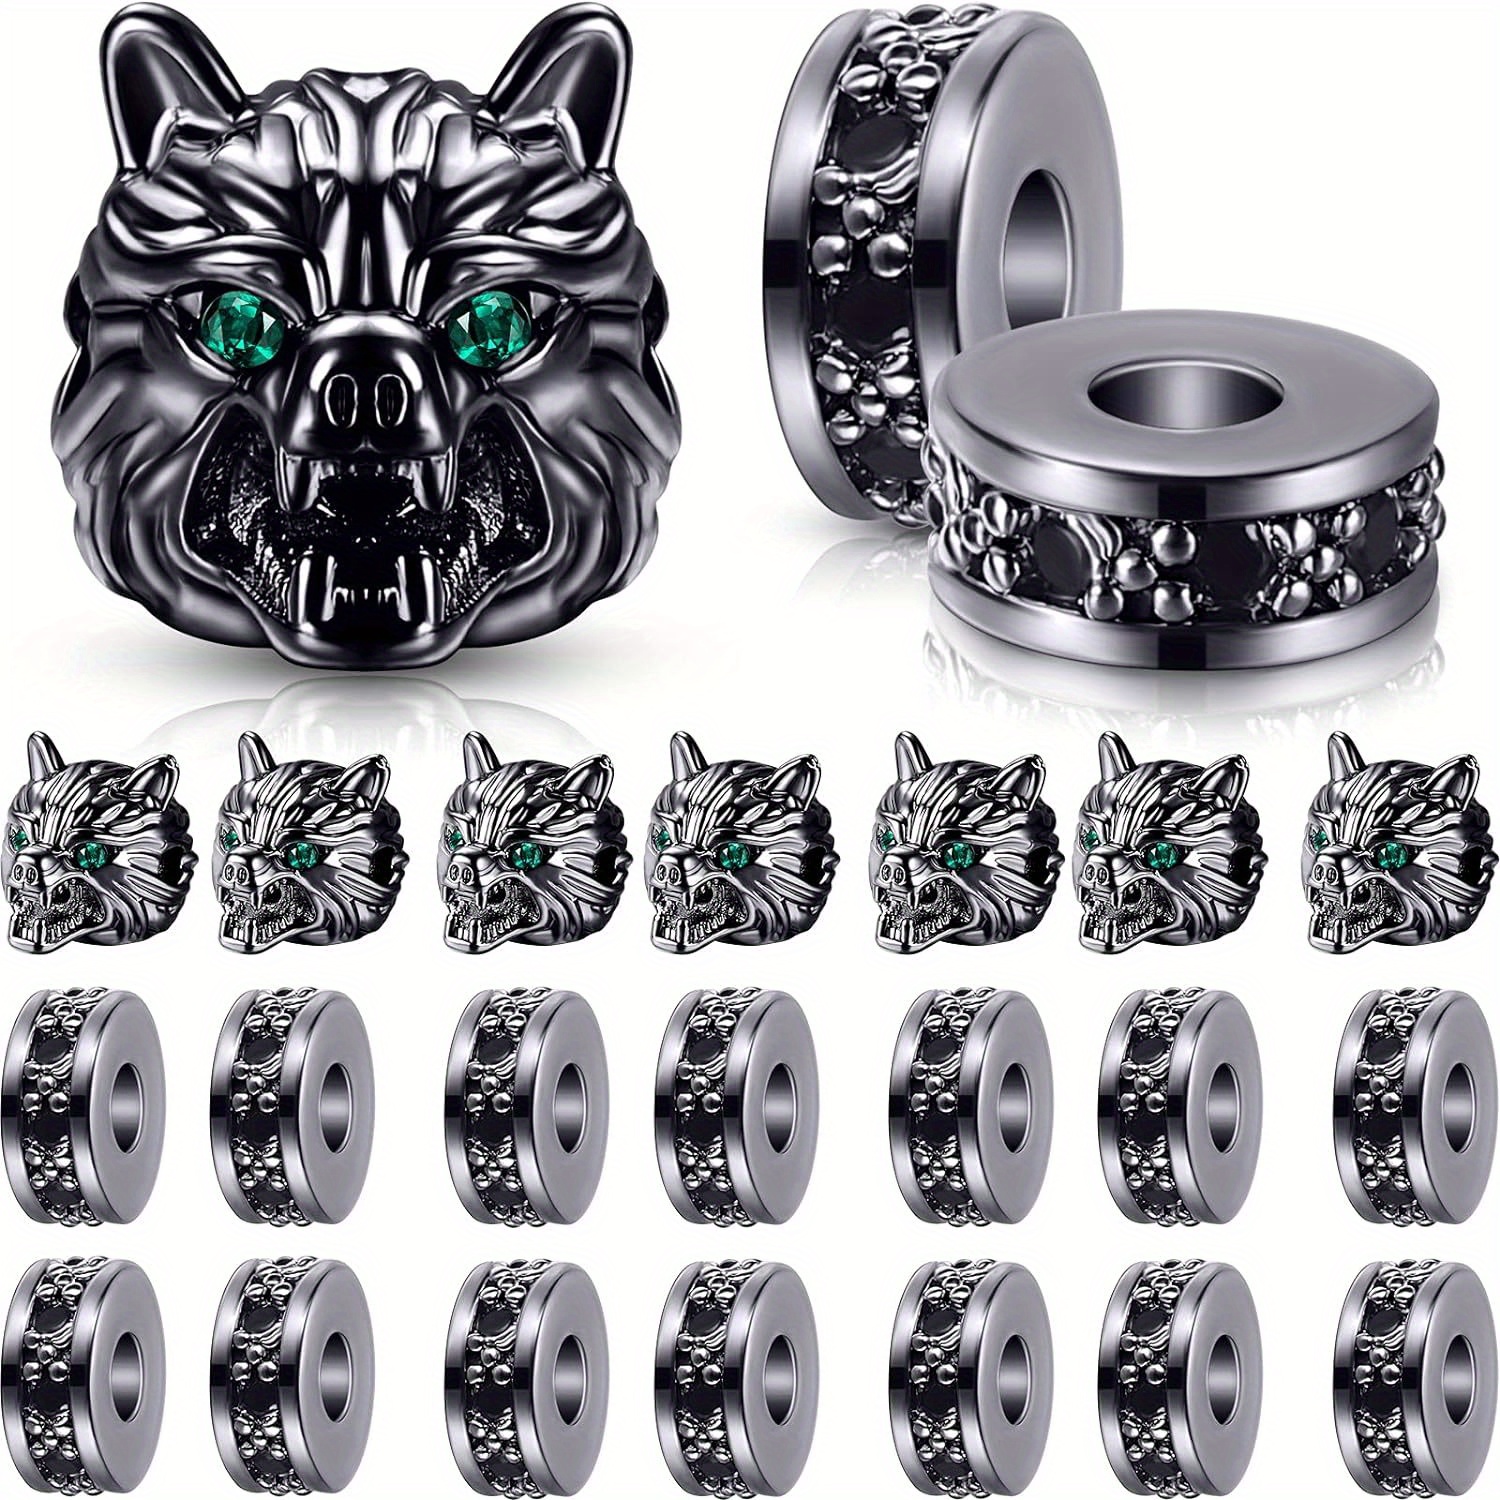 

24-piece Wolf Head Charms And Spacer Beads Set - Copper Animal Pendants, Wolf Theme, Black Zircon Crystal Connectors For Diy Men's Bracelets - Halloween Jewelry Making Kit Without Power Supply